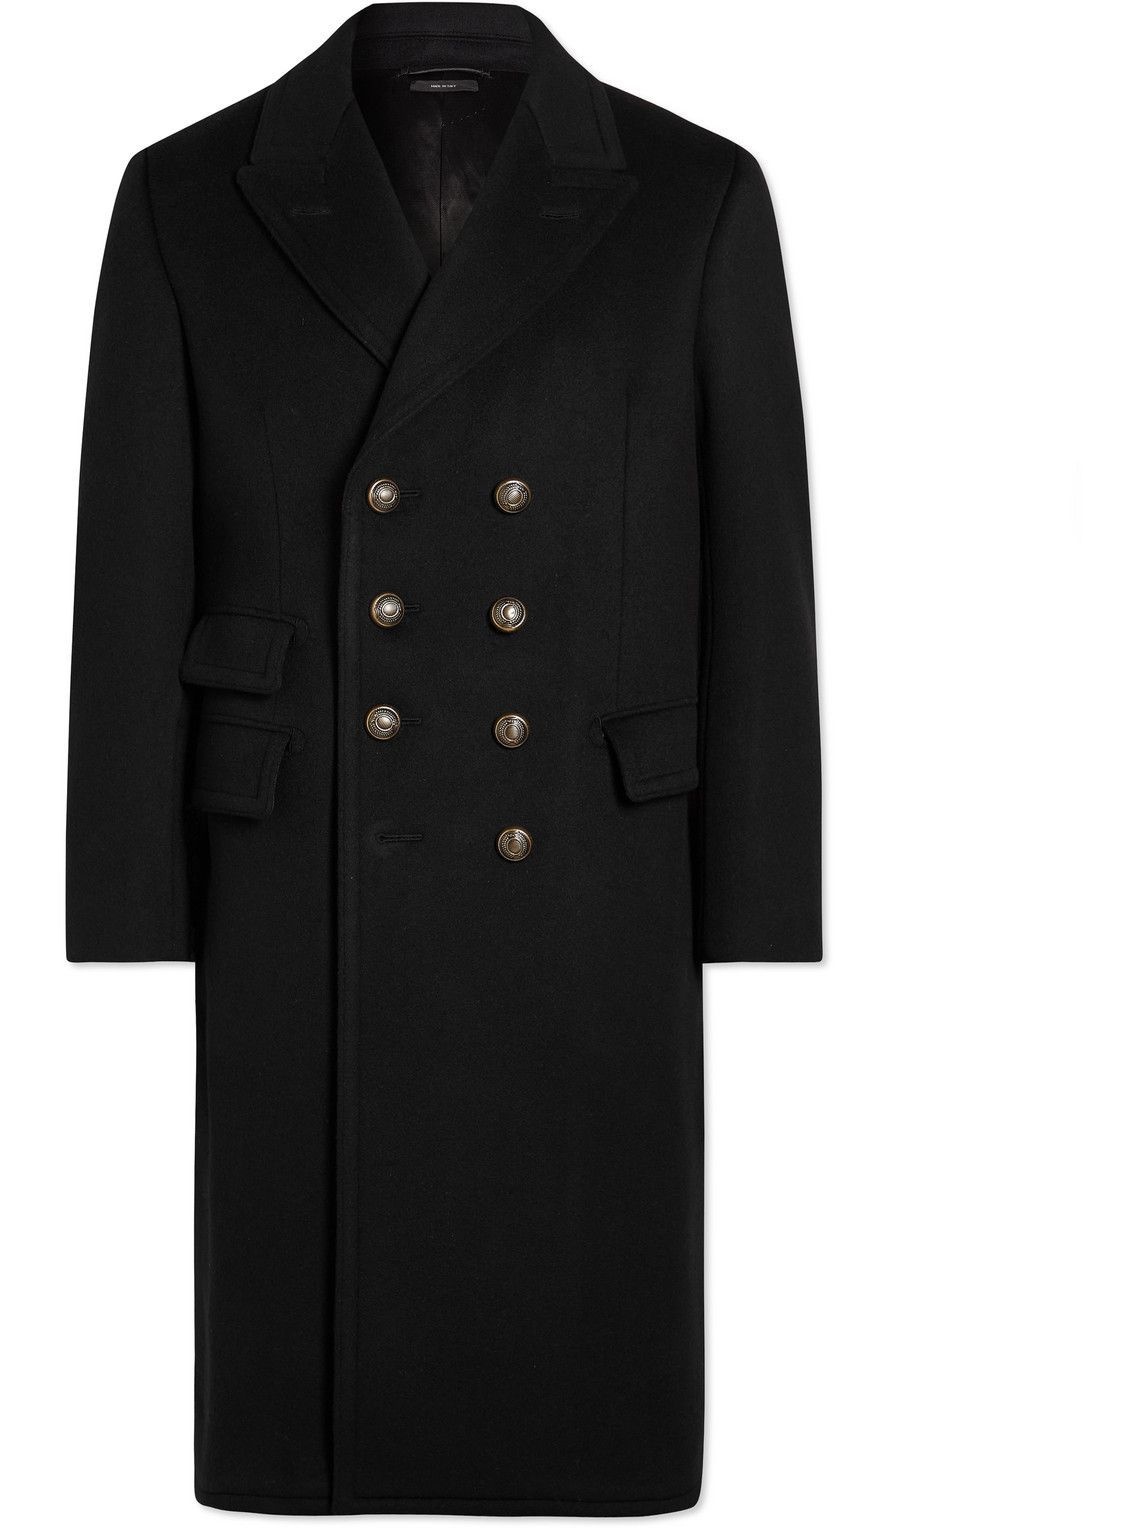 TOM FORD - Slim-Fit Double-Breasted Wool and Cashmere-Blend Coat ...